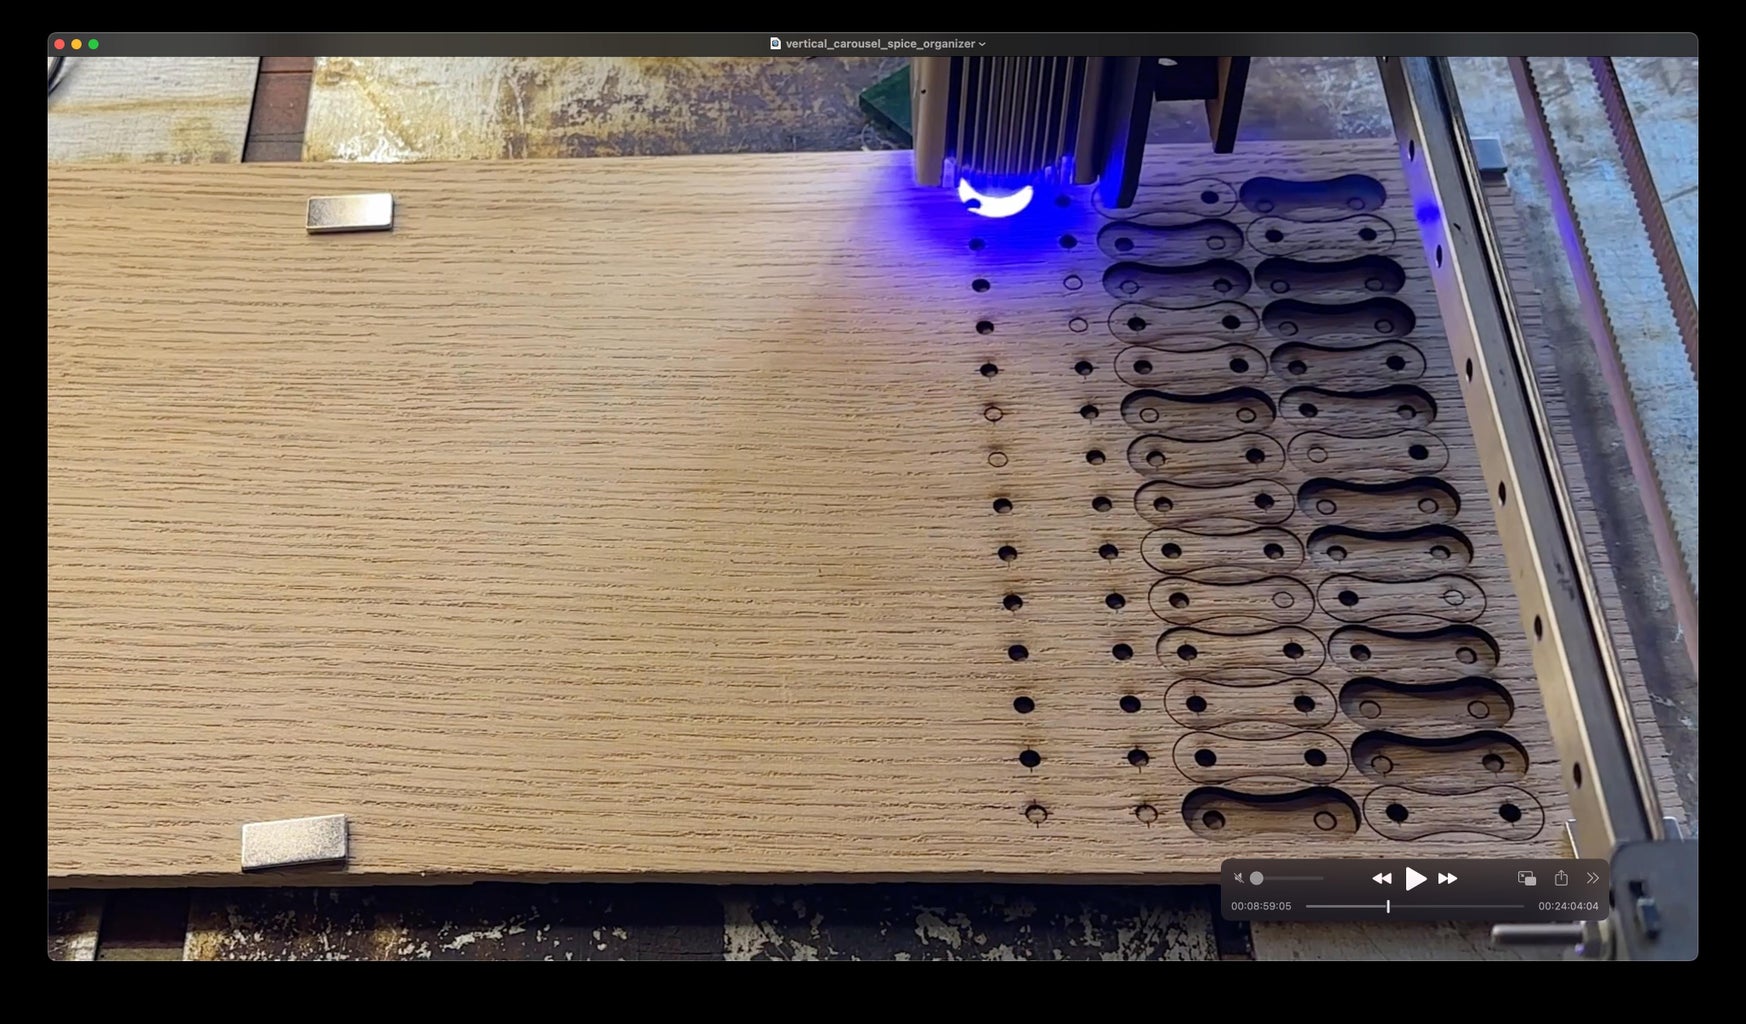 Laser Cut the Chains Details With Axles